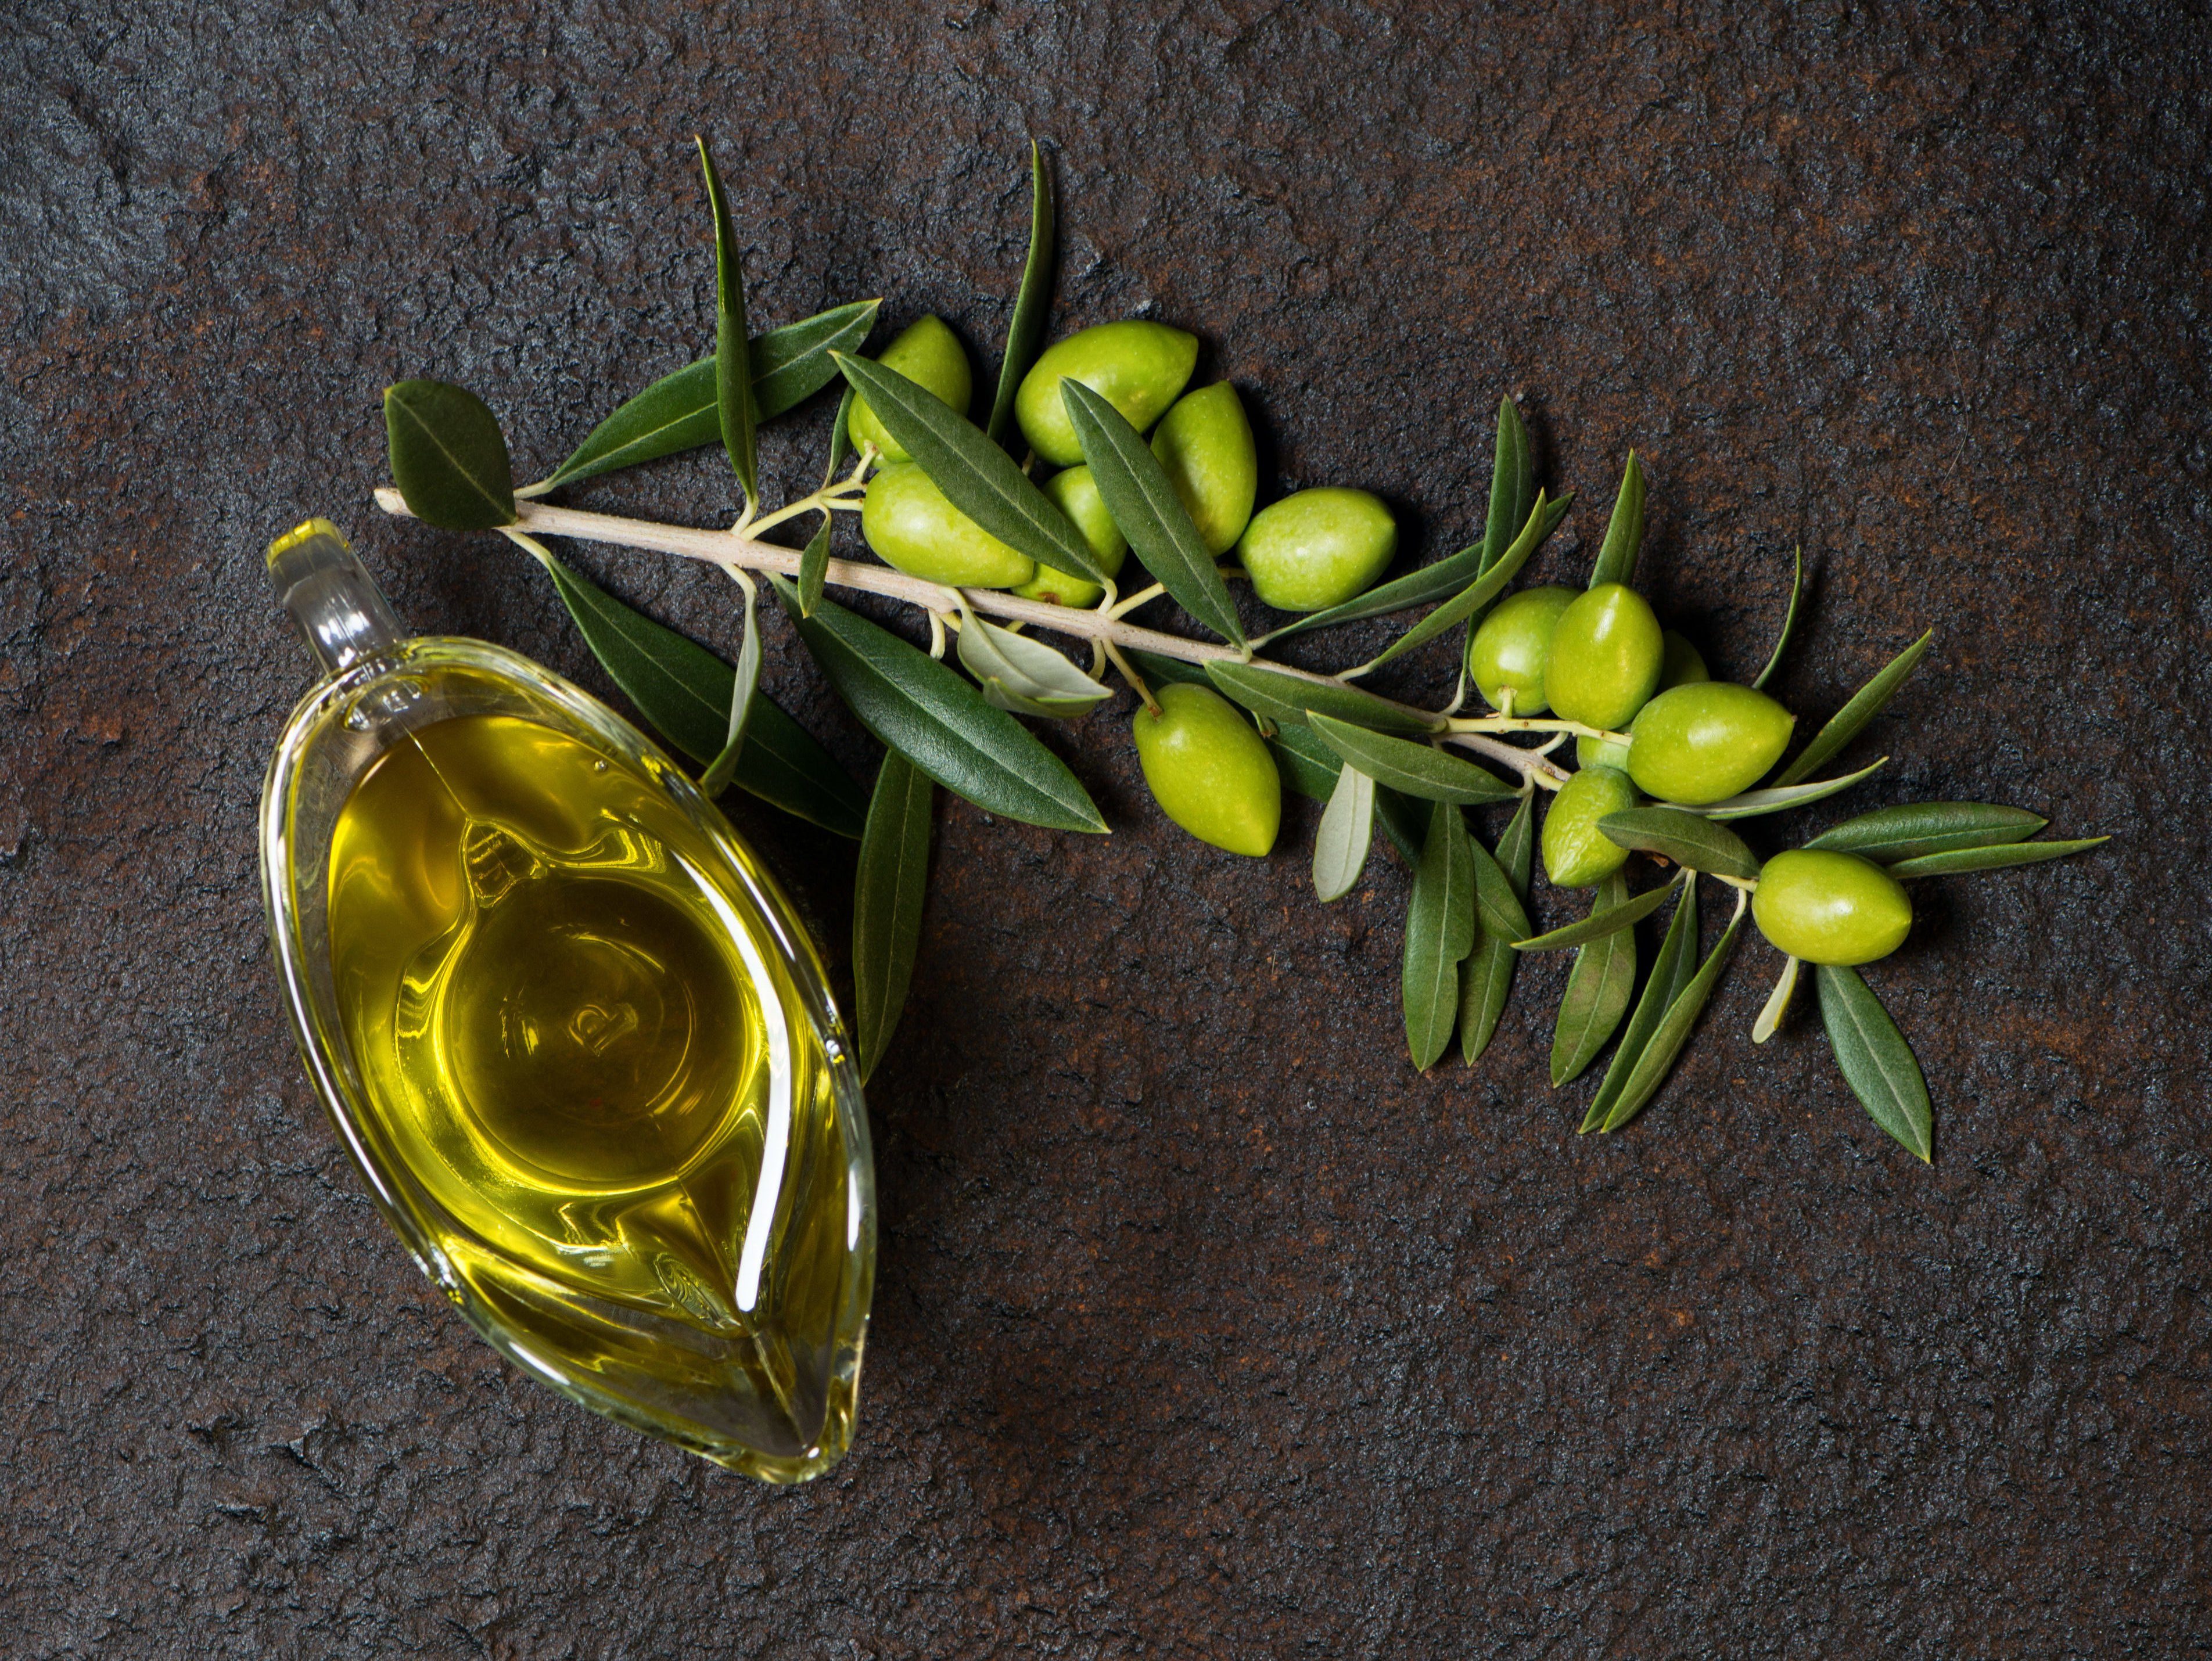 Top view of branch with green olives and glass sauceboat of olive oil on a black grunge metal background.